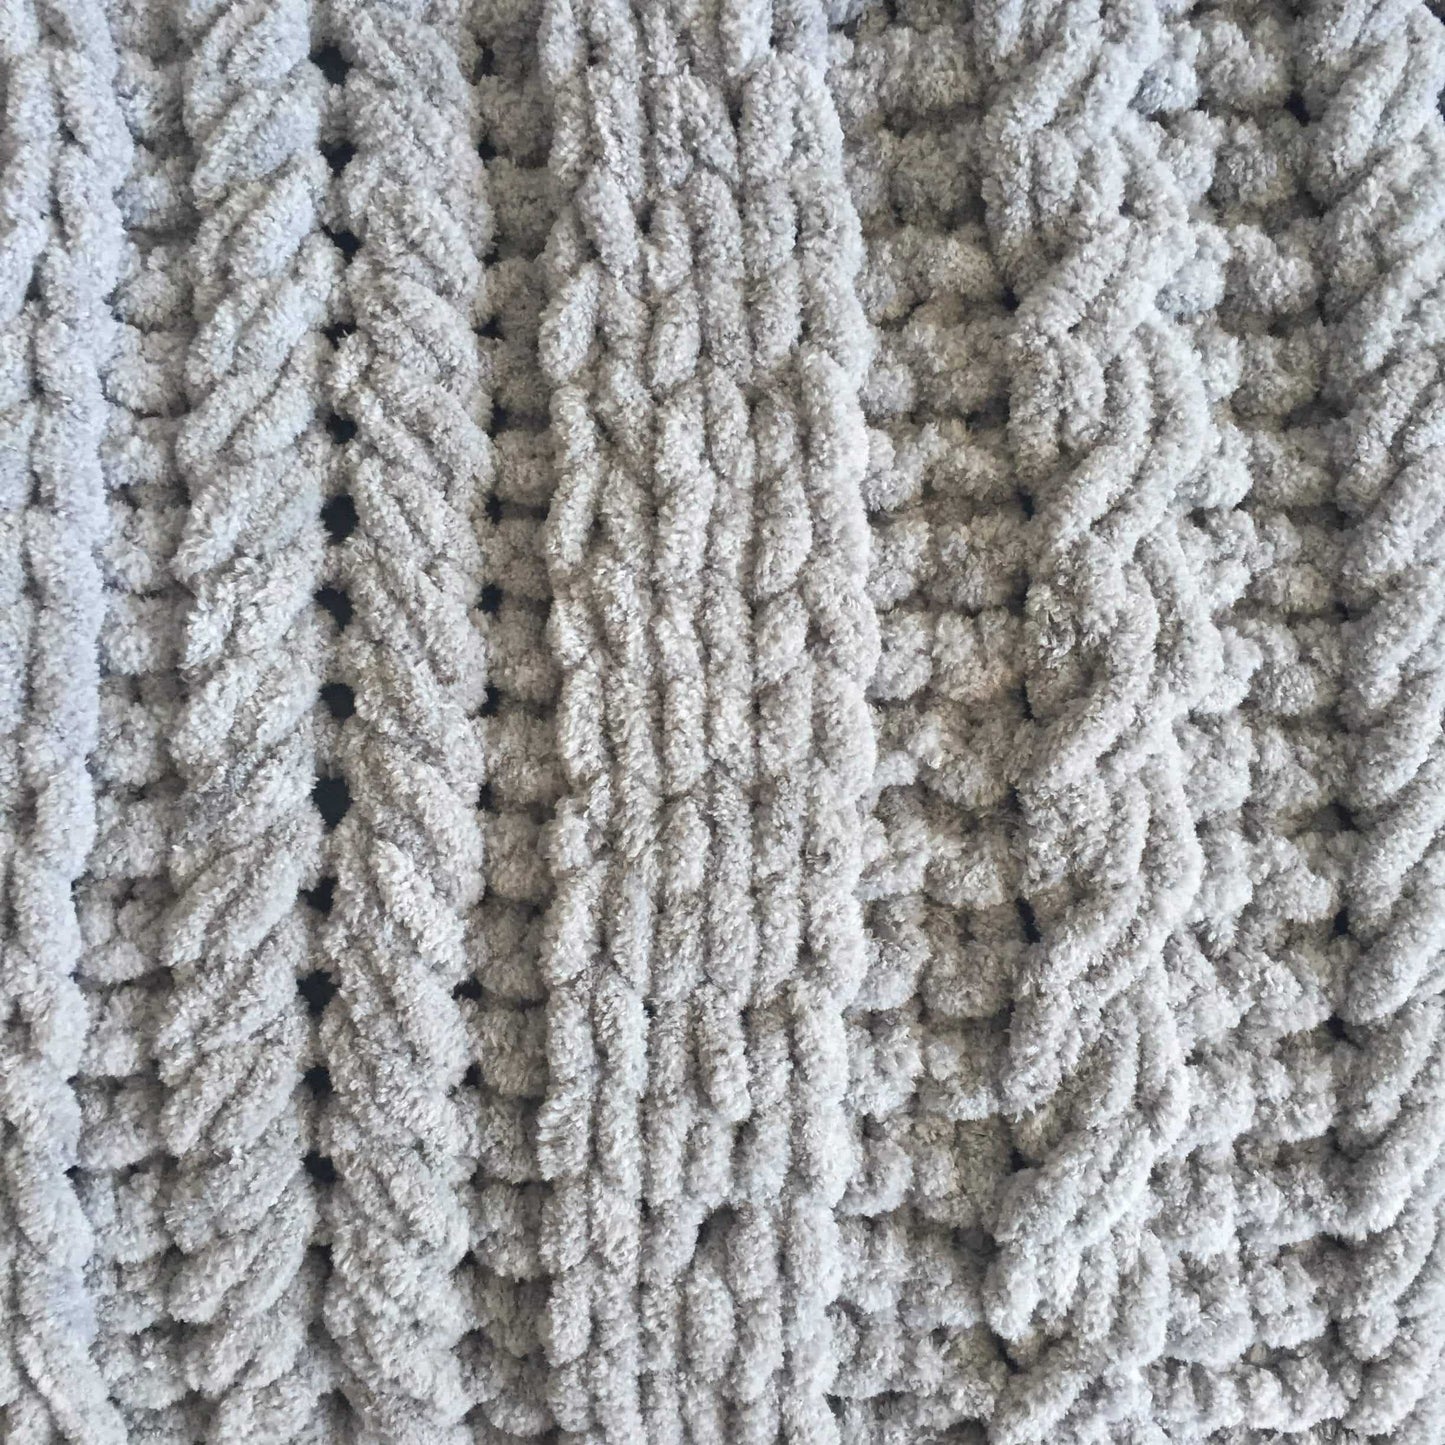 PATTERN: Extra-Chunky Braid Cable Blanket - ILoveMyBlanket